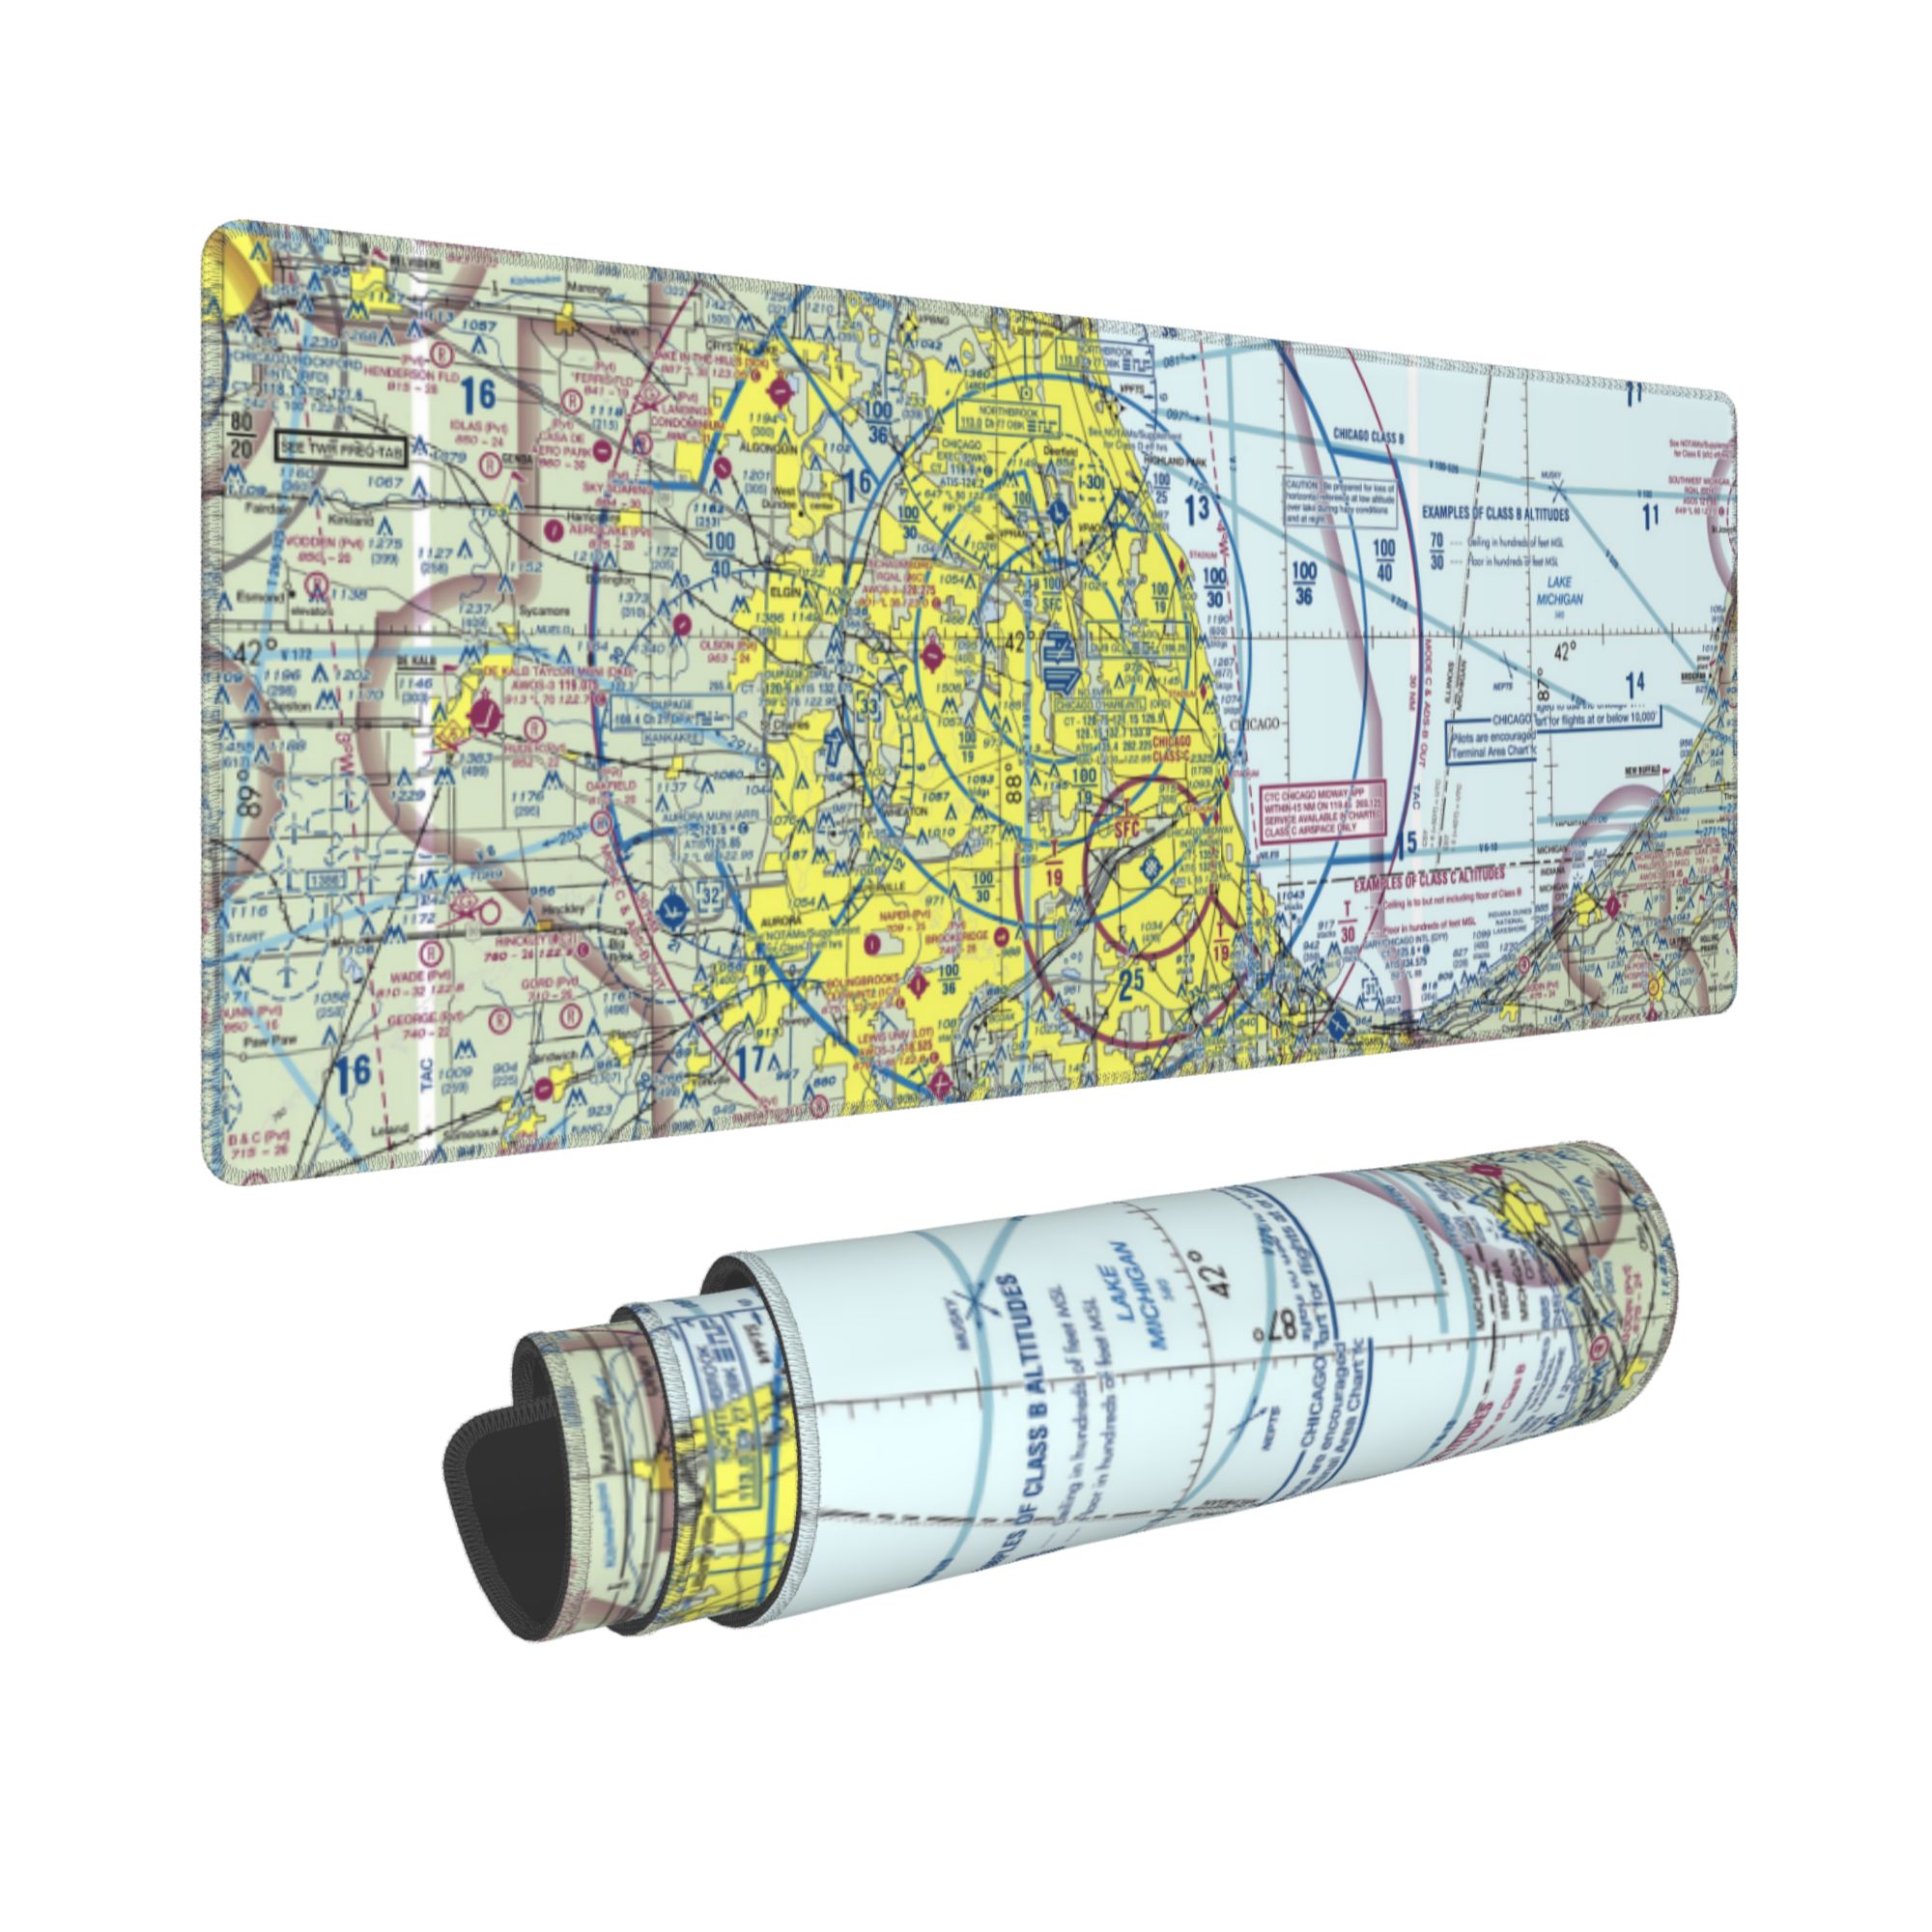 Chicago ORD Aeronautic Sectional Chart Mouse Pad. Gift for pilot, captain, crew and aviation lovers.